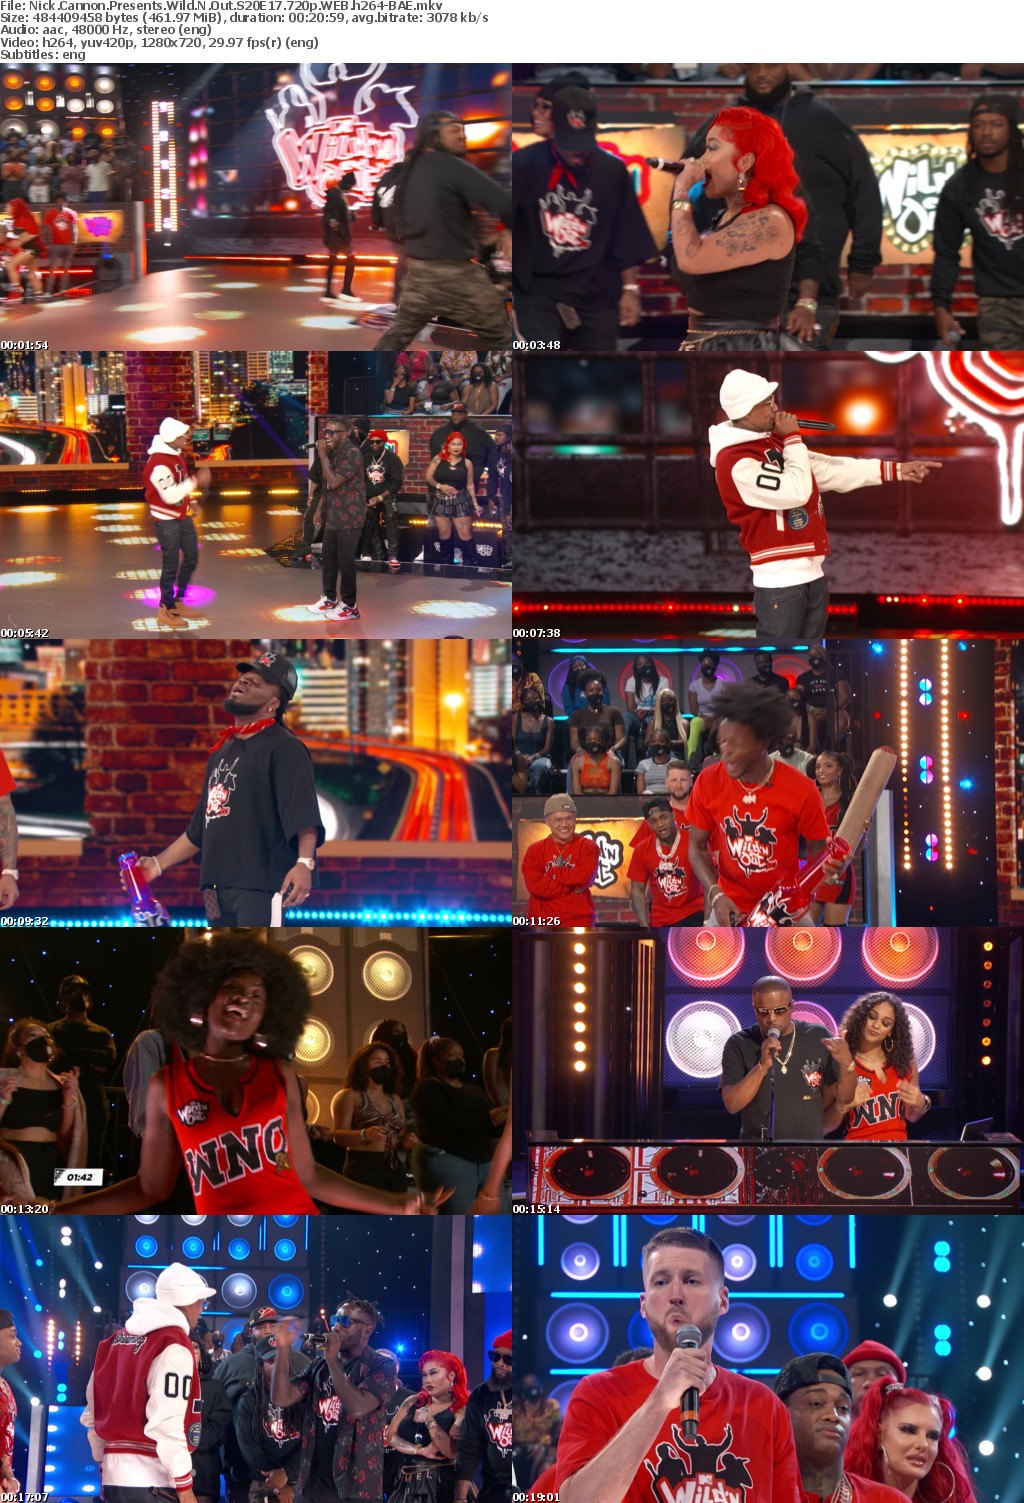 Nick Cannon Presents Wild N Out S20E17 720p WEB h264-BAE